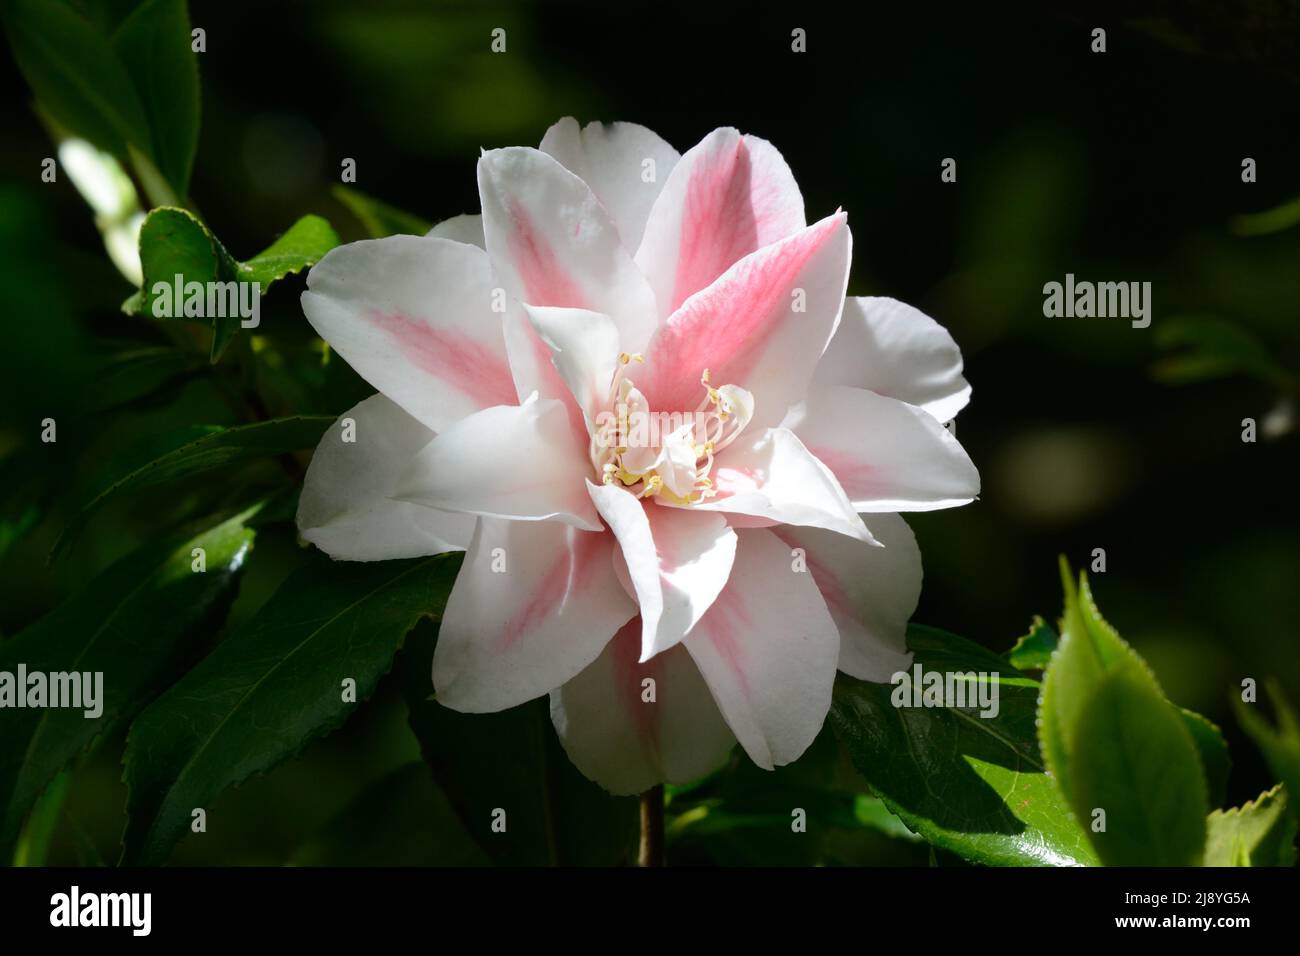 Camilla Japonica Lady Vansittart semi double white flowers tinged with pale pink Stock Photo